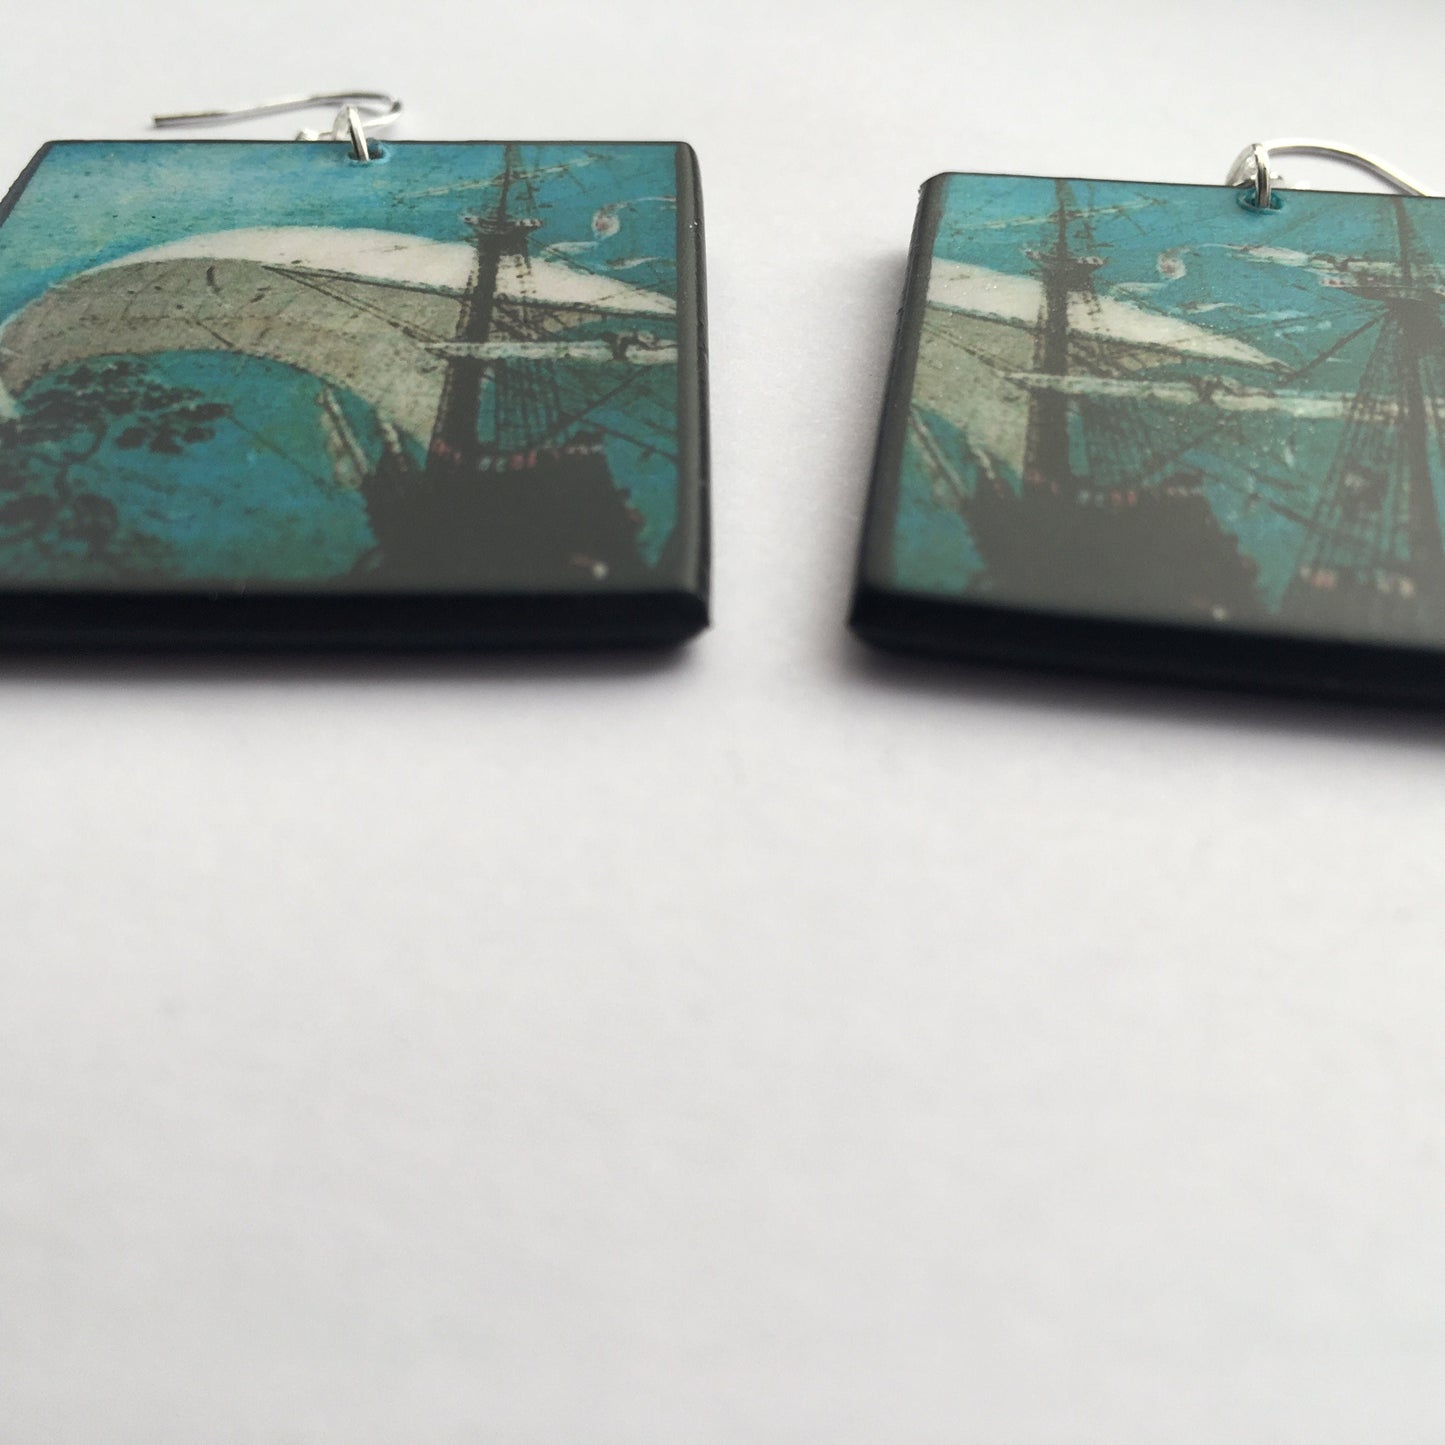 Wooden mismatched art earrings. Summer birthday gift for her. Masted sailing ship,detail of oil  painting by famous artist Pieter Bruegel.